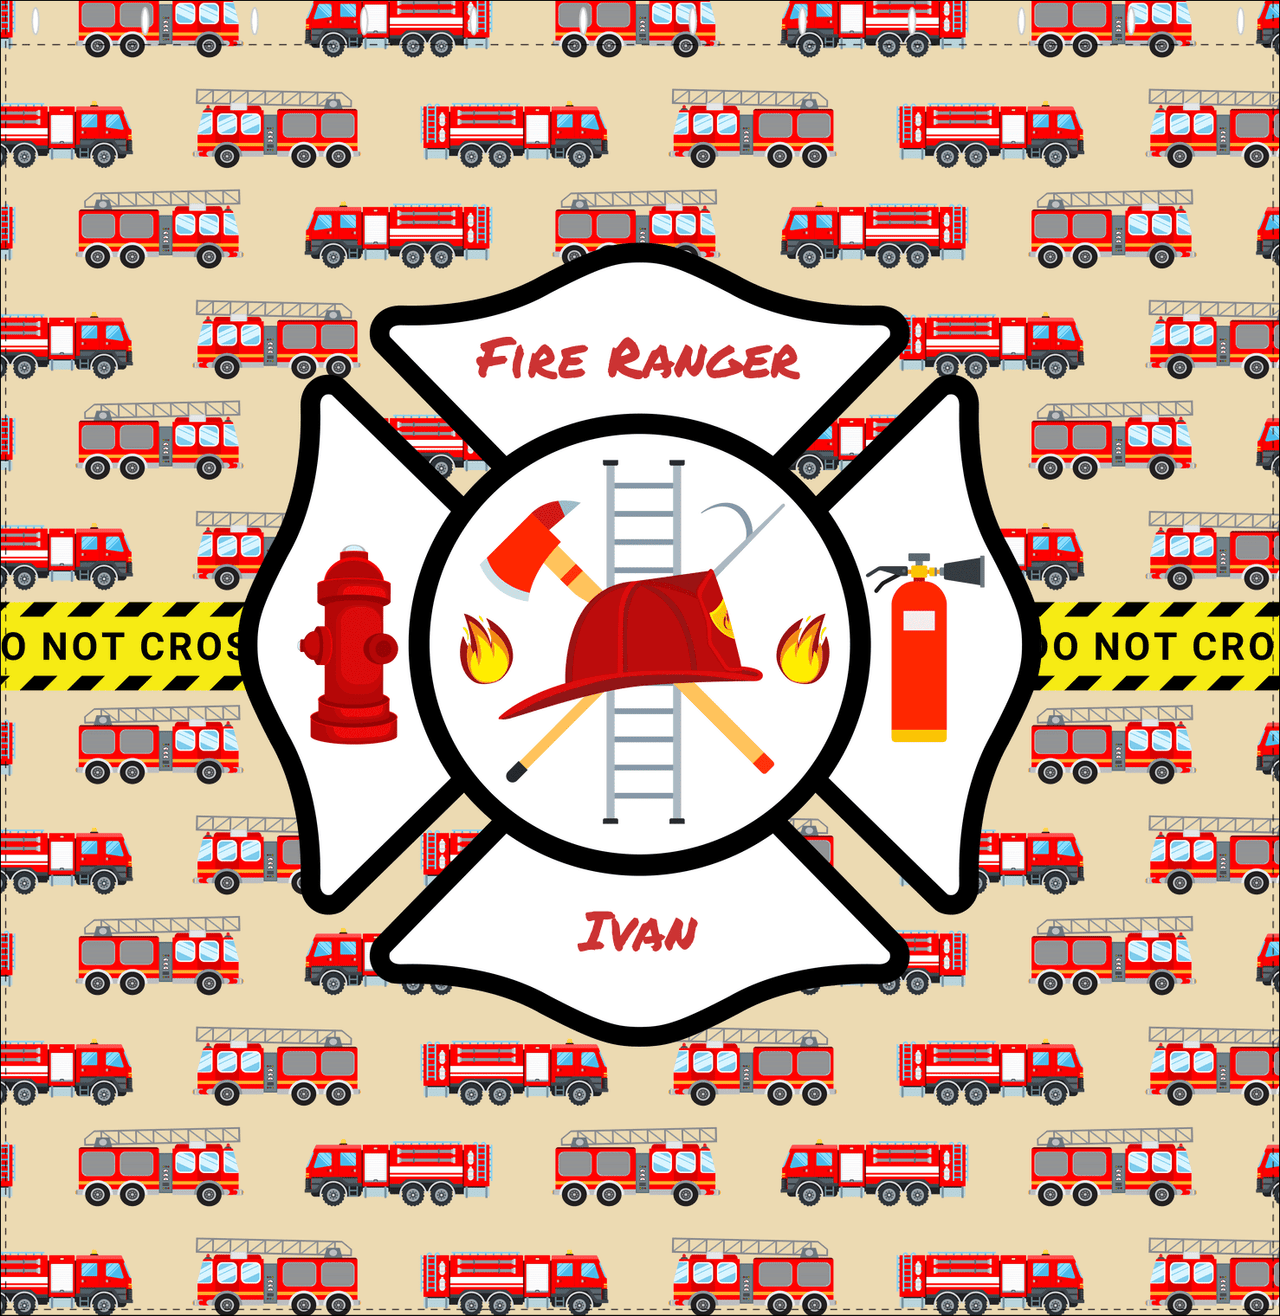 Personalized Fire Truck Shower Curtain XIII - Light Brown Background - Decorate View